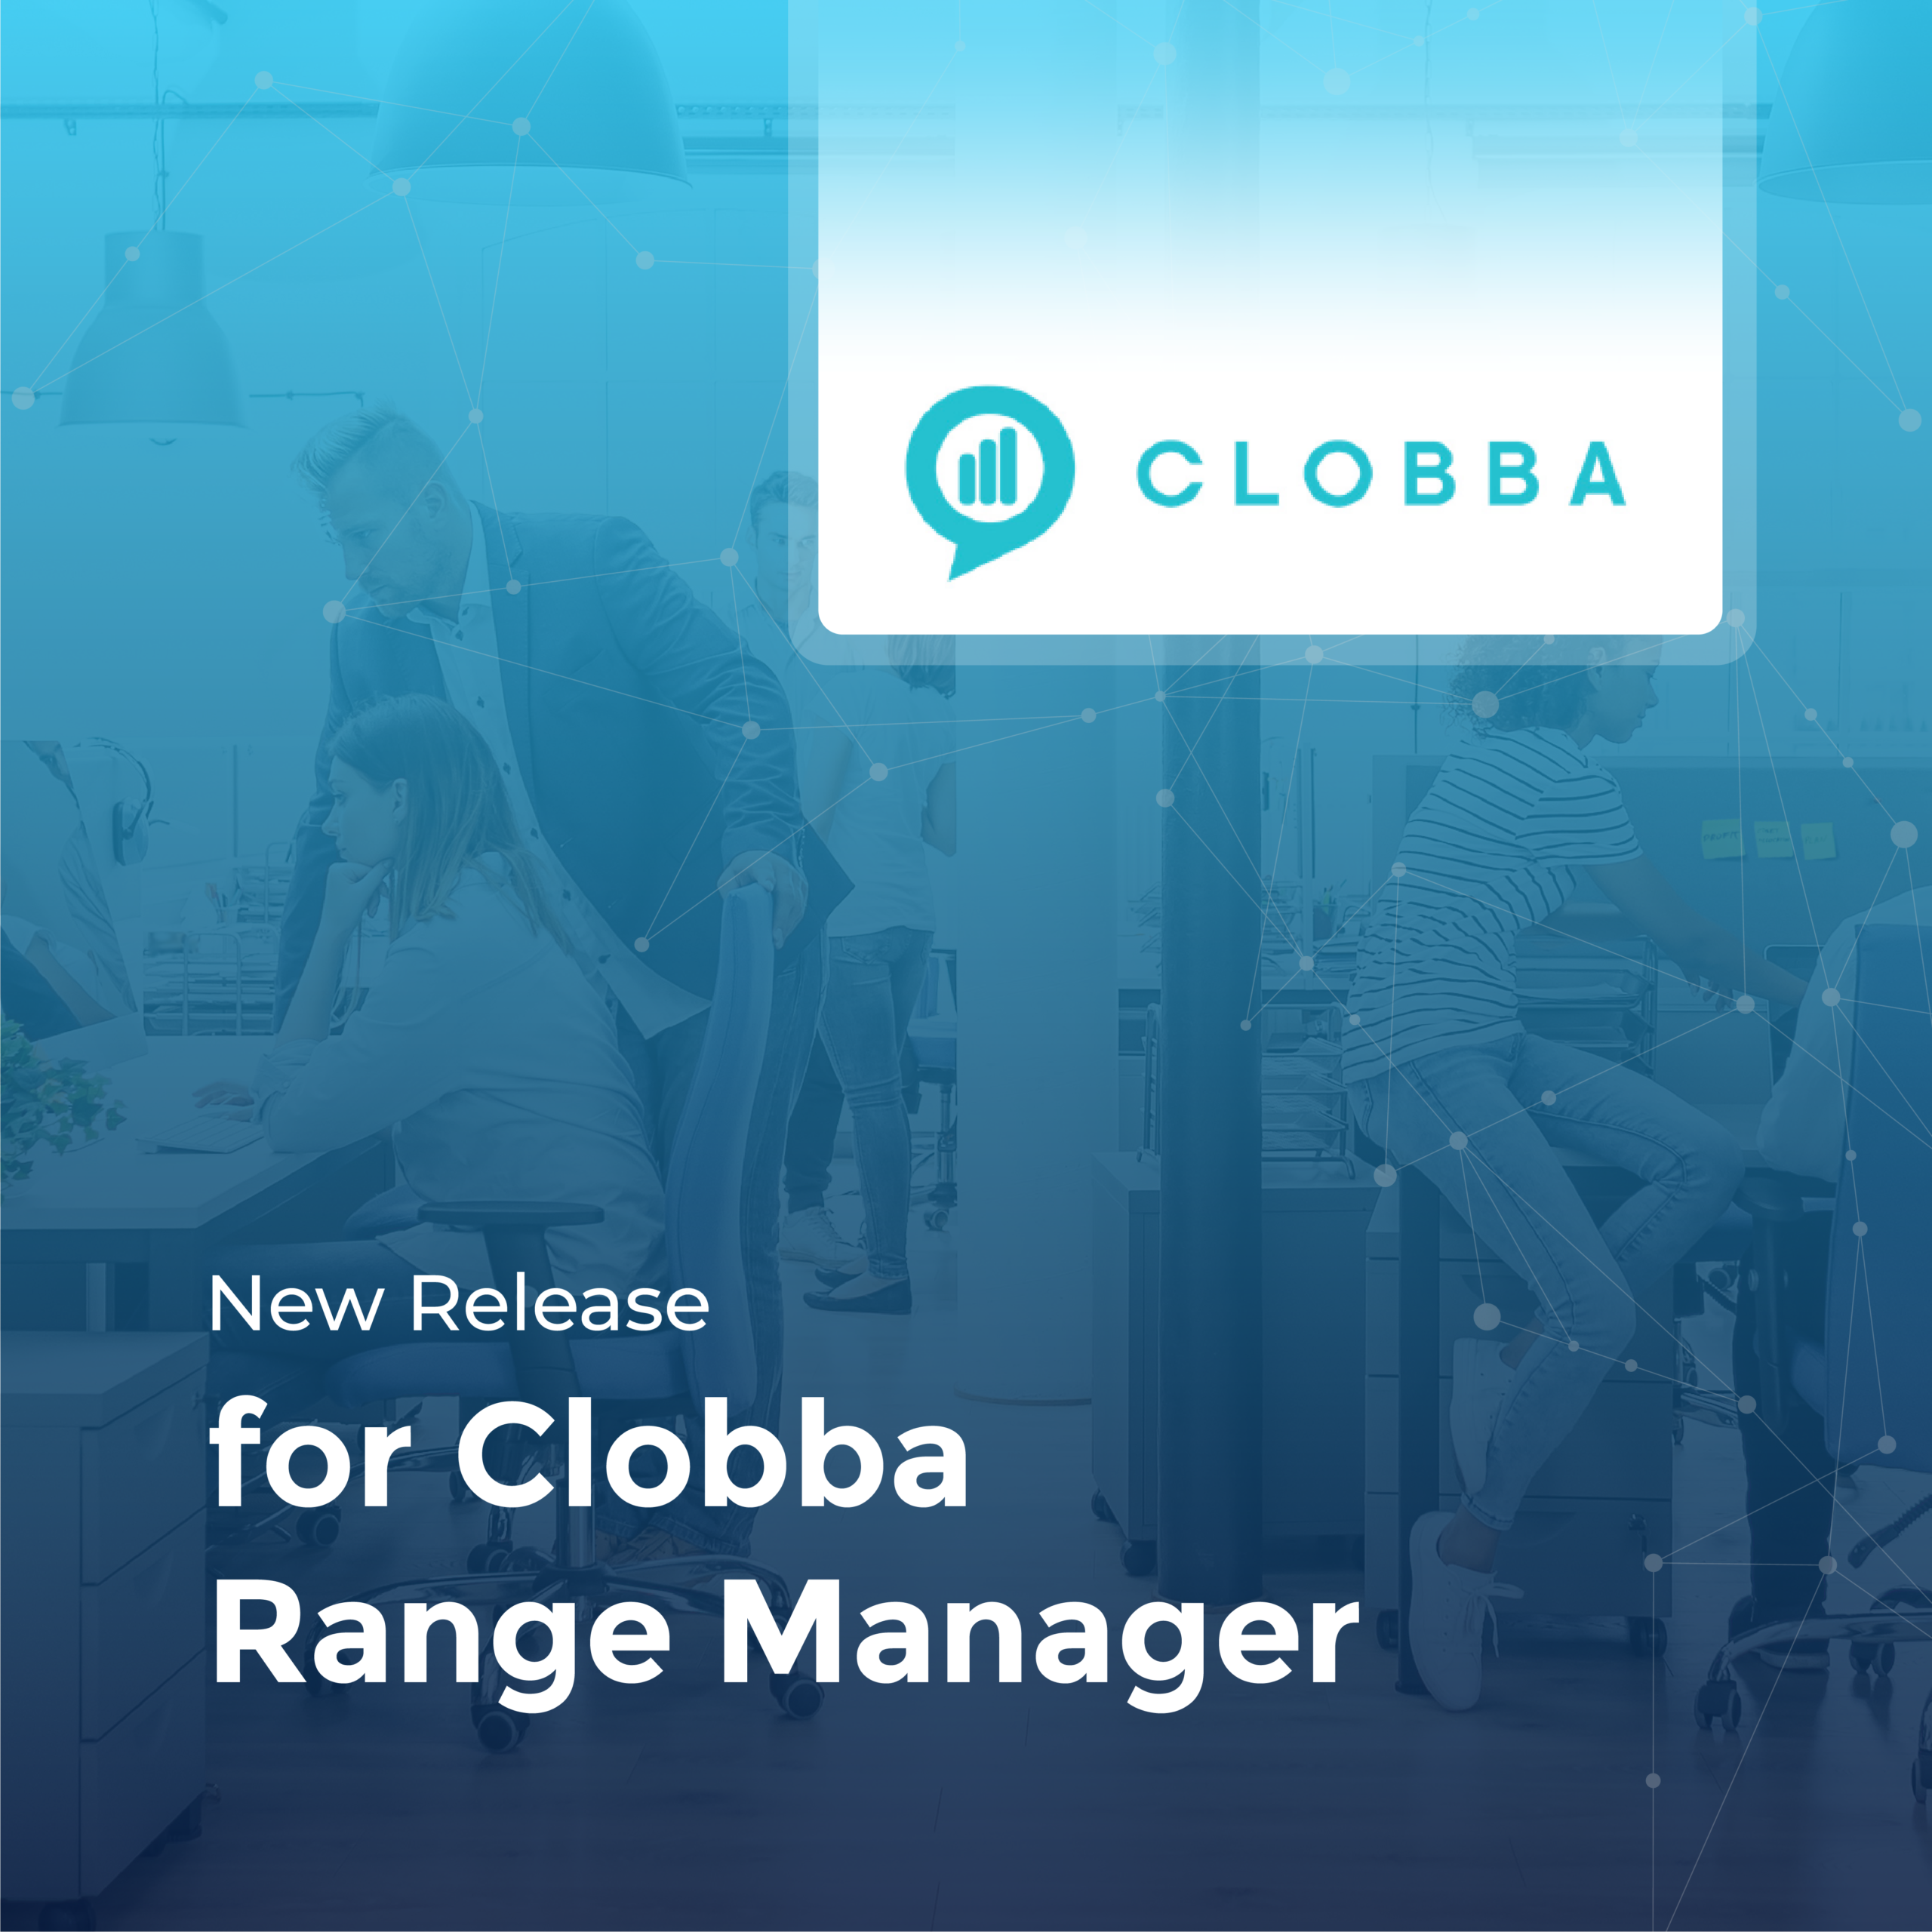 New Release for Clobba Range Manager